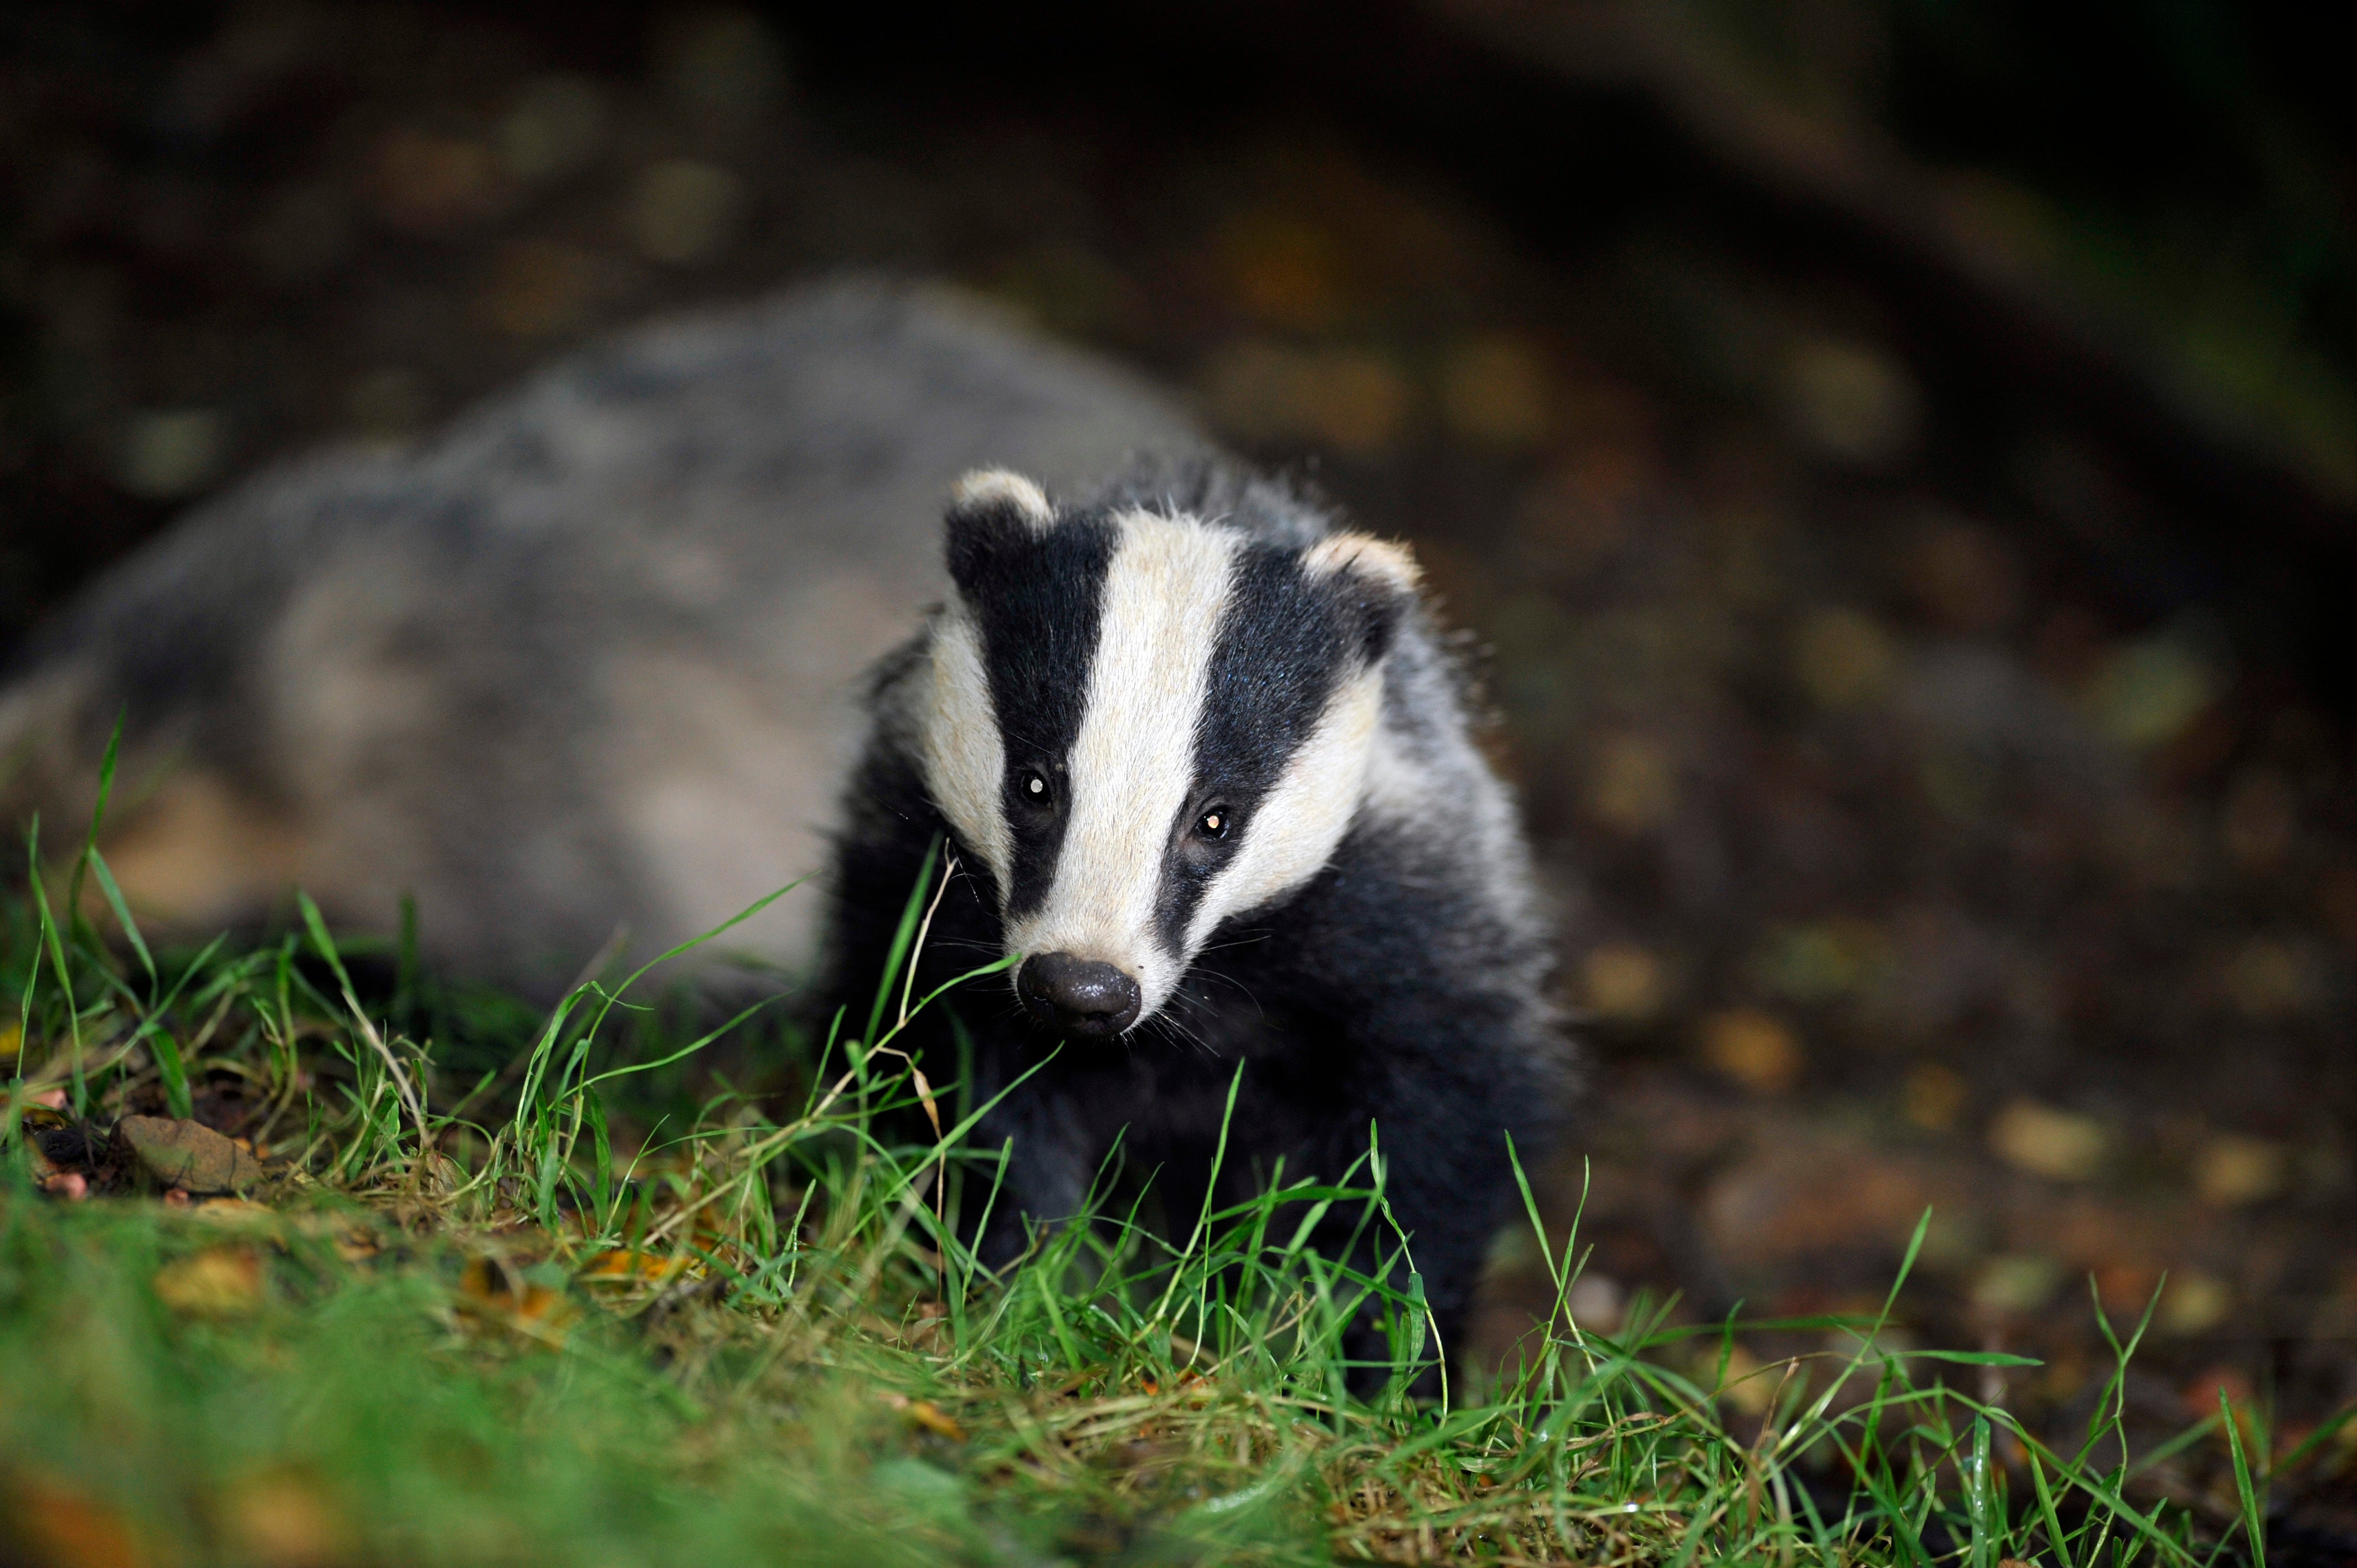 Police have launched an investigation after a badger was found dead and nailed by its feet ten foot up a tree